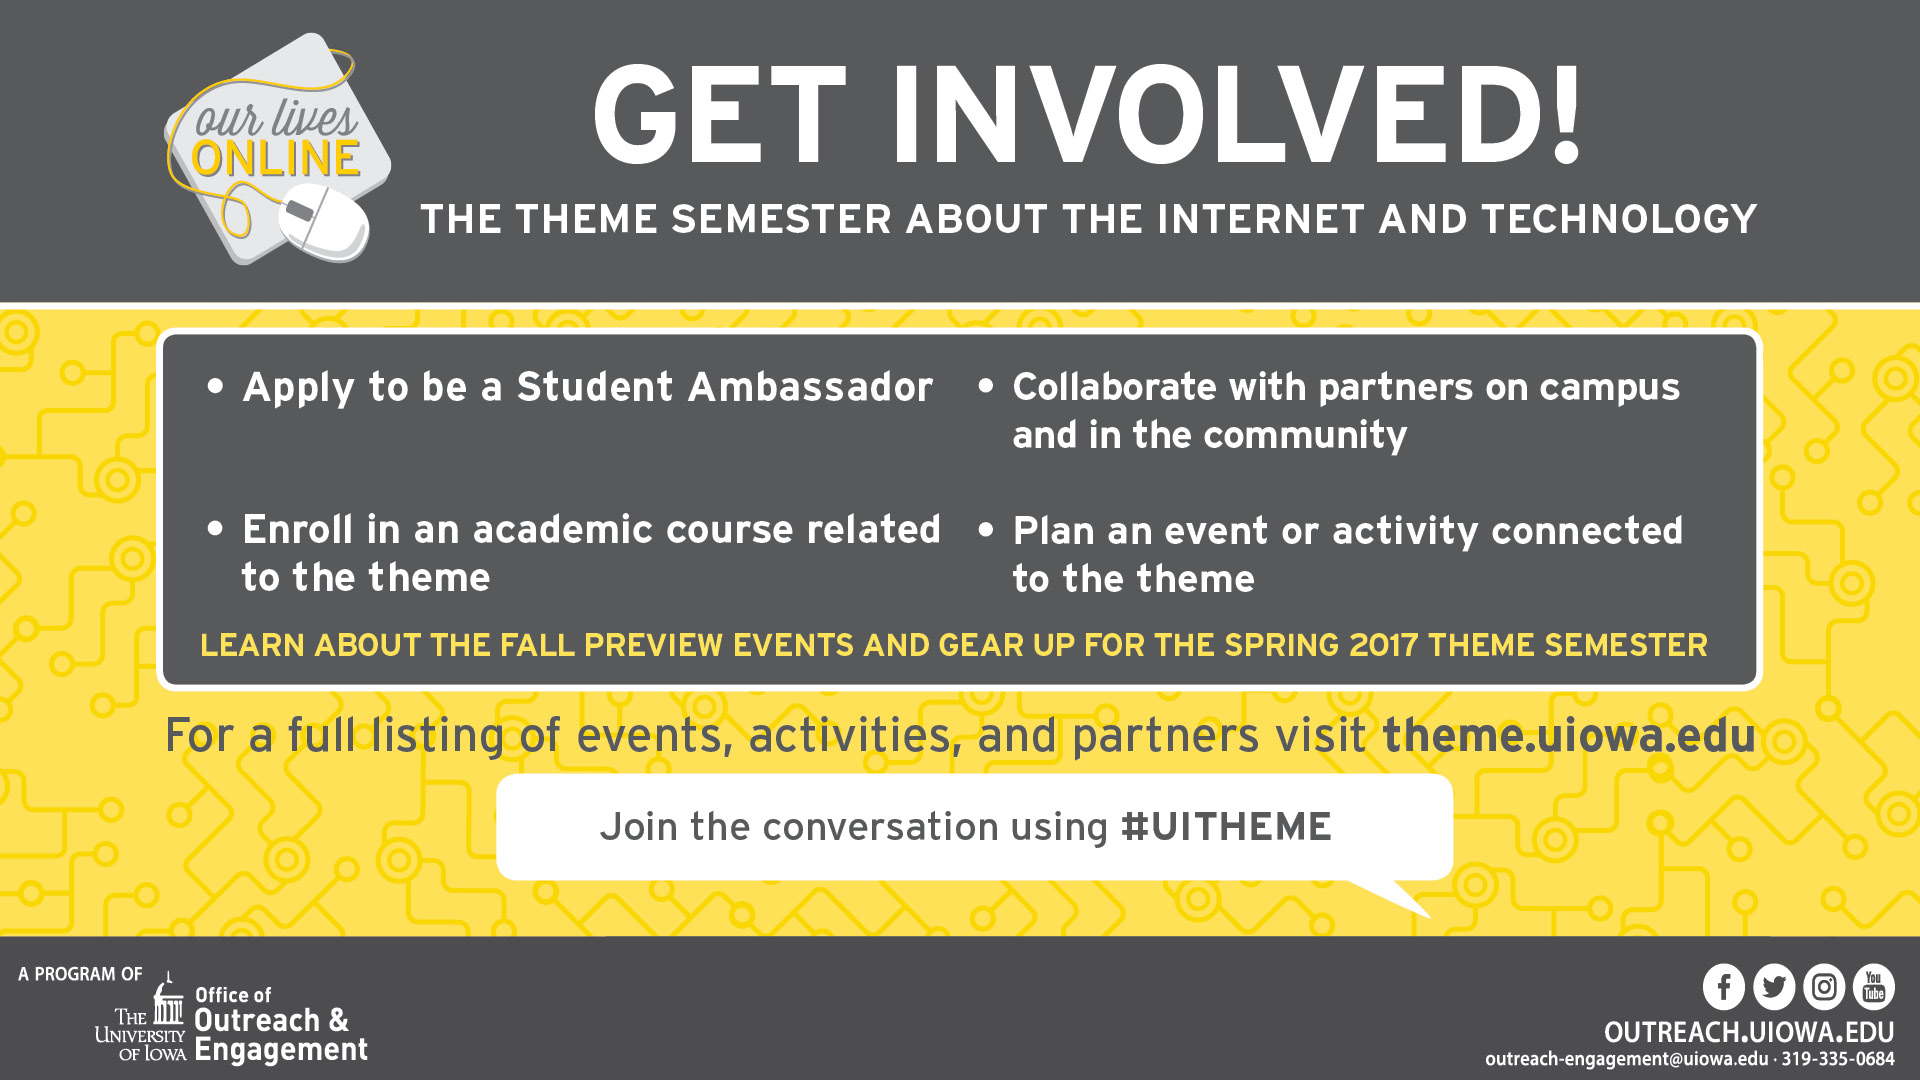 Our Lives Online theme semester call for involvement